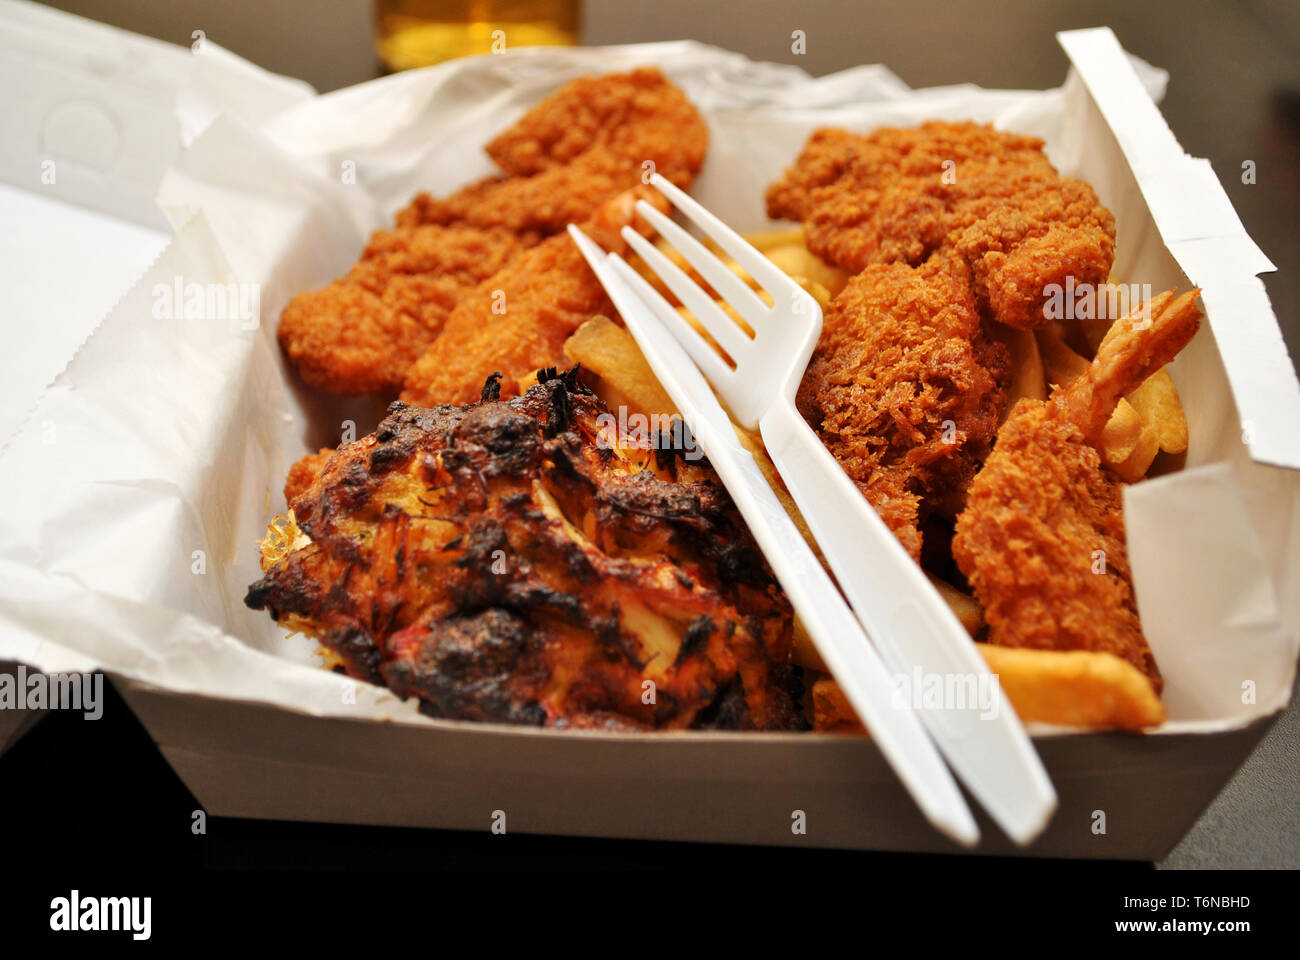 Fried Seafood Dinner in einem Takeout Box Stockfoto